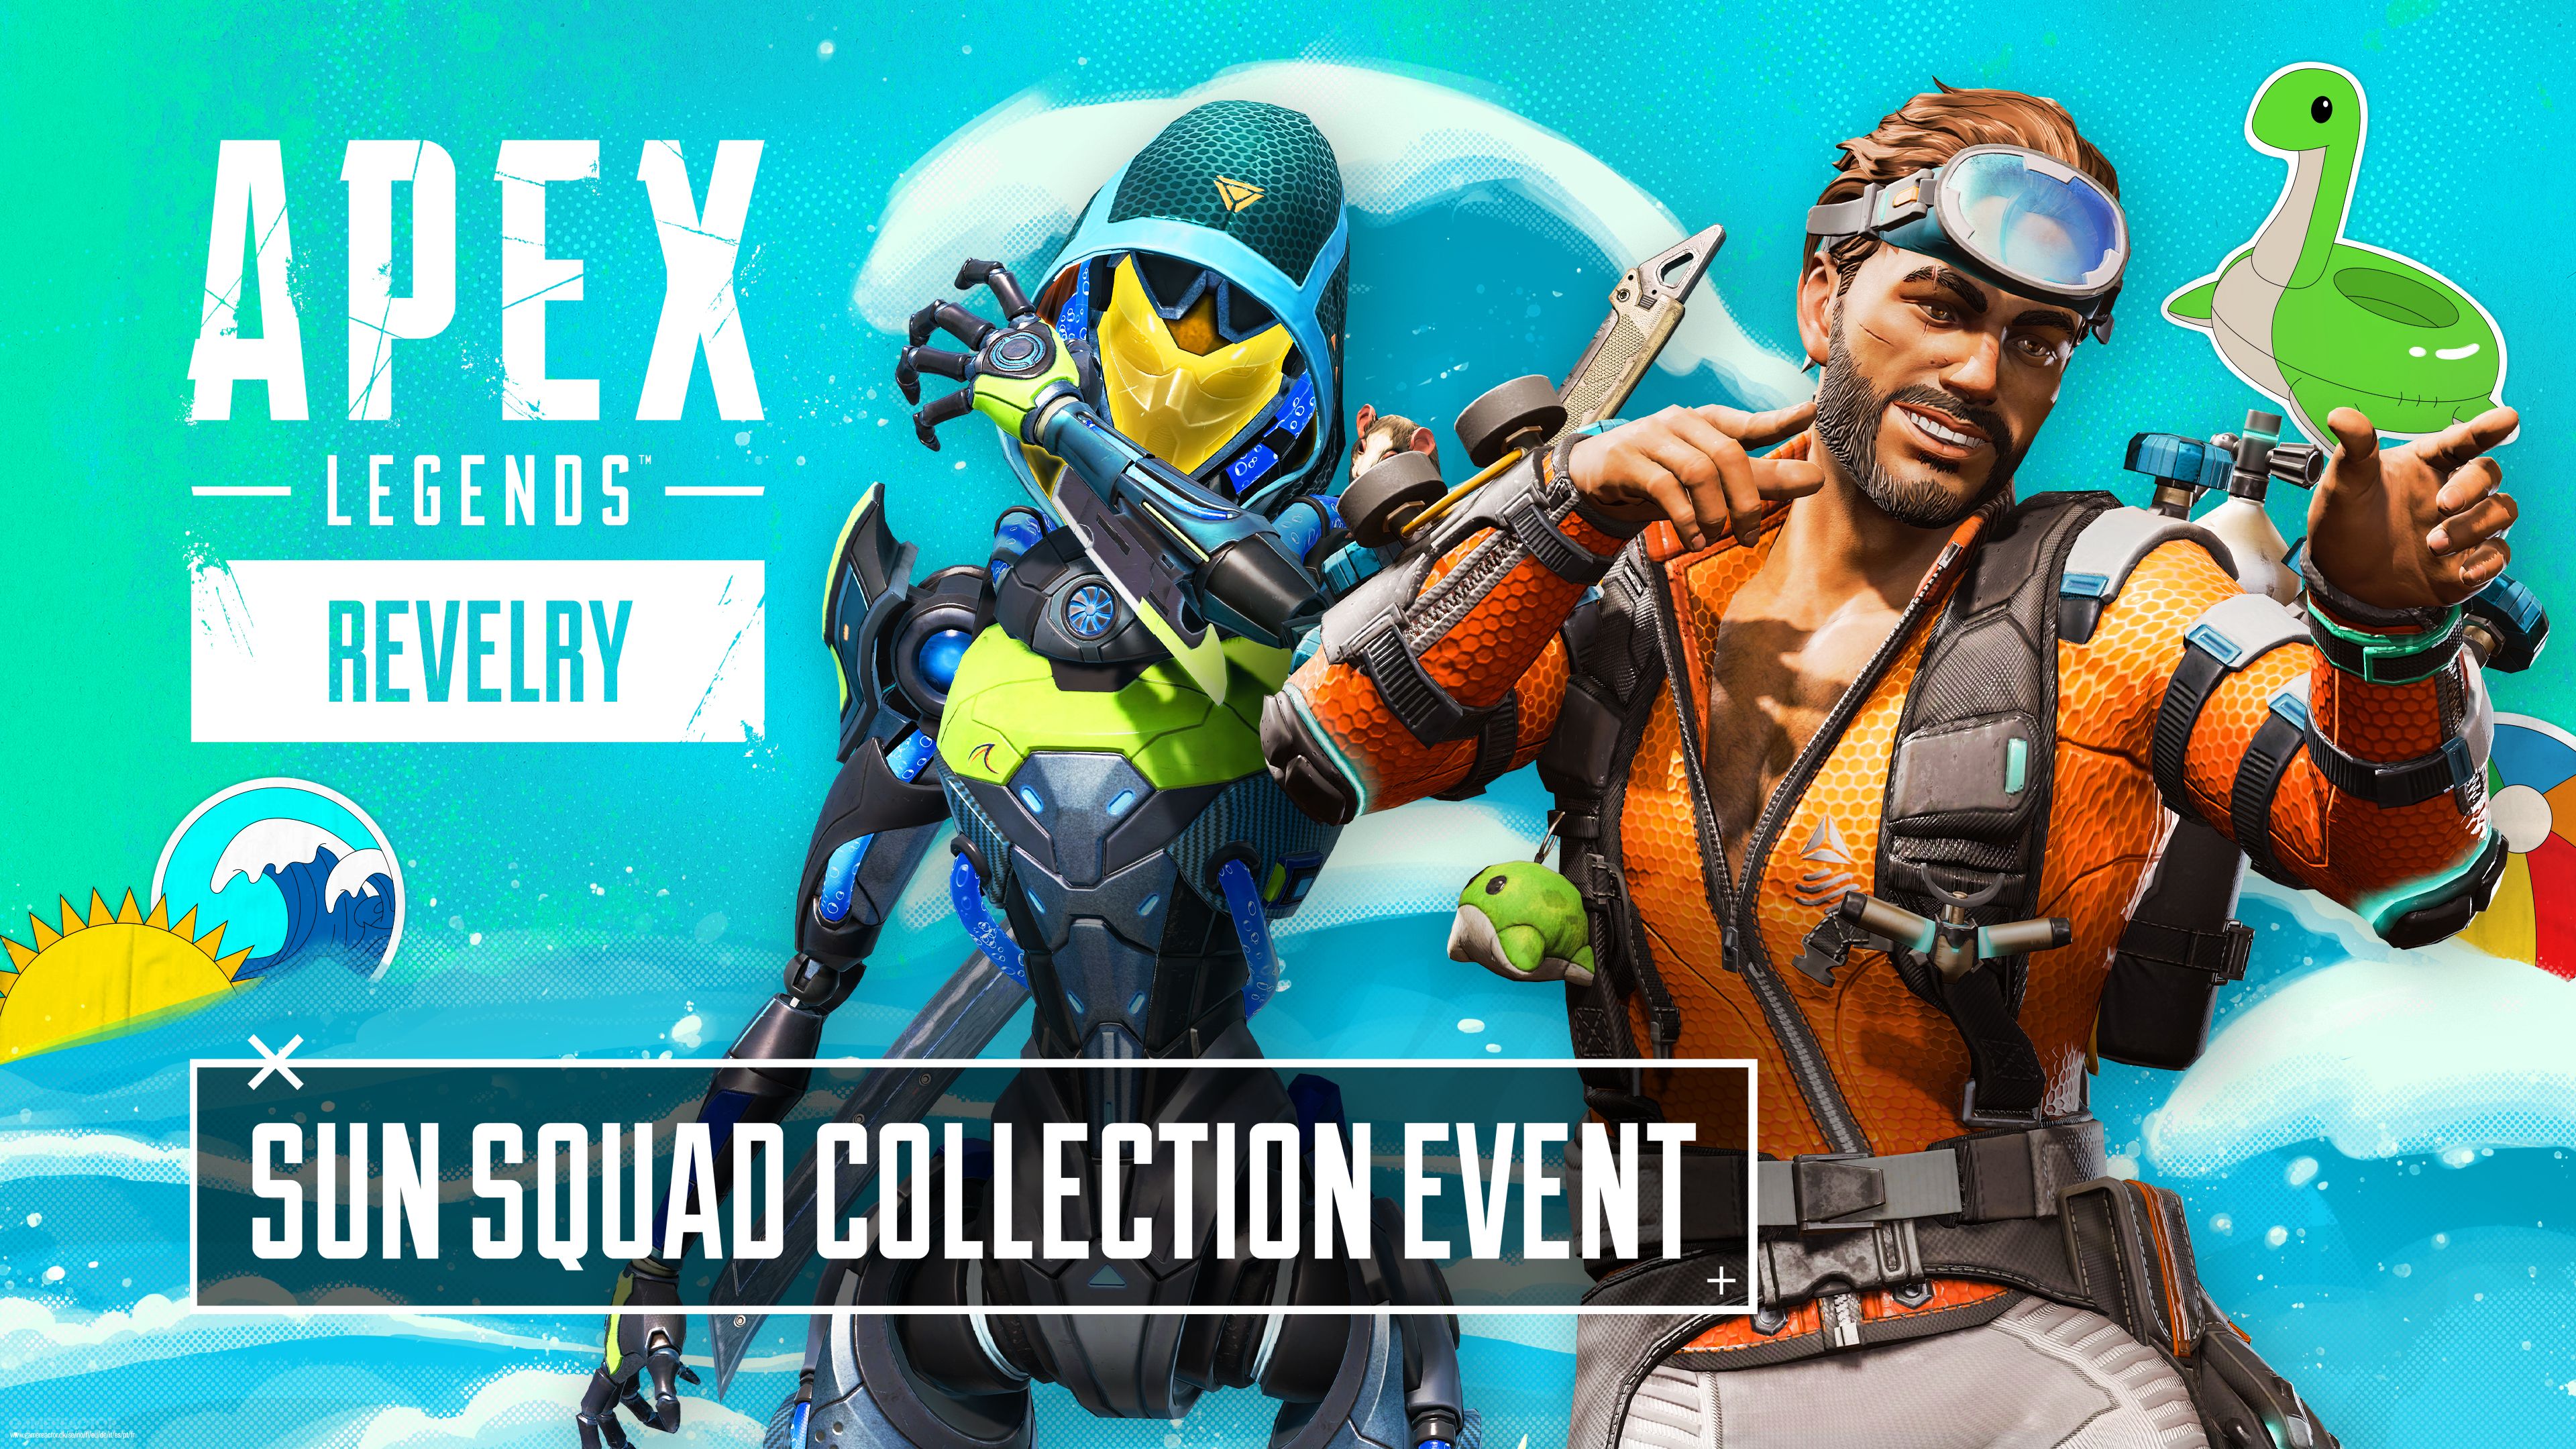 Apex Legends presents the Solar Squad collectible event with new content